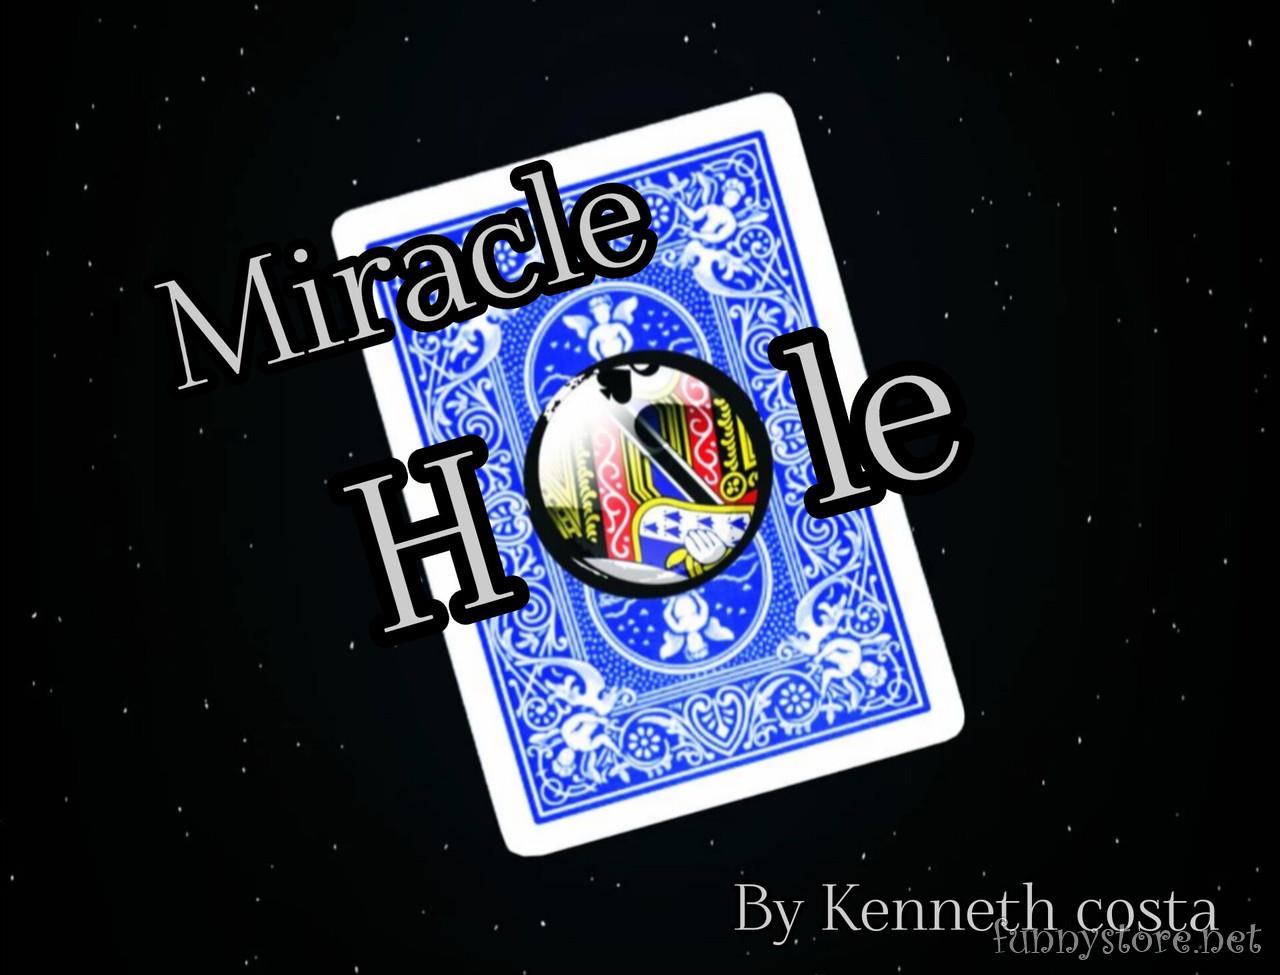 Kenneth Costa - Miracle hole